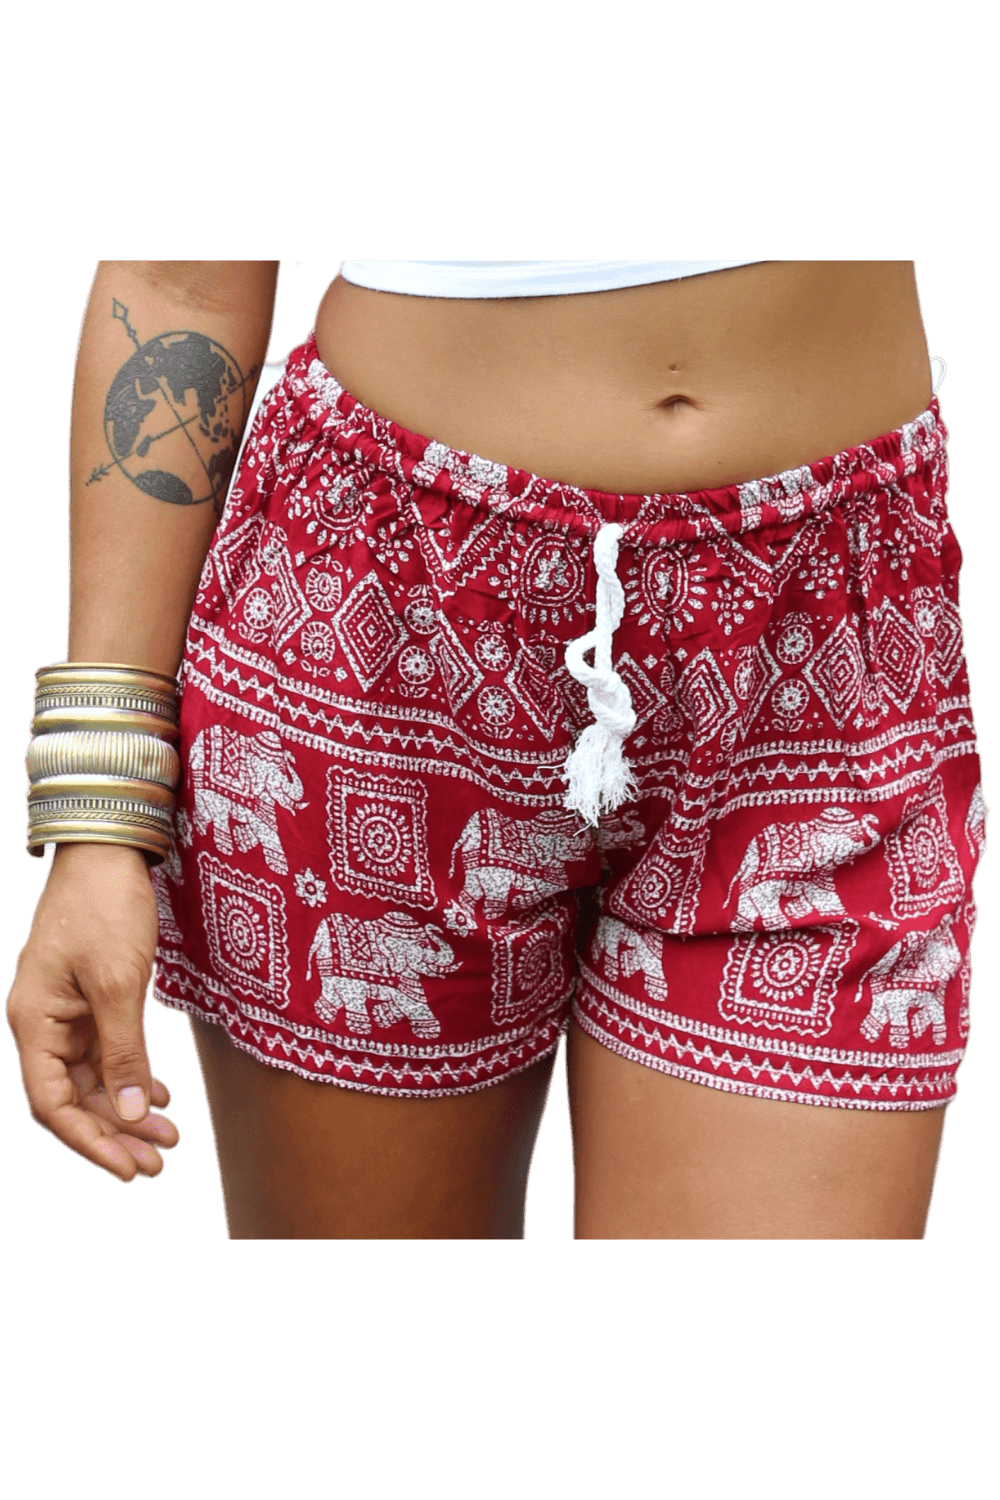 Red Elephant shorts. Cotton clothing from Bohemian Island